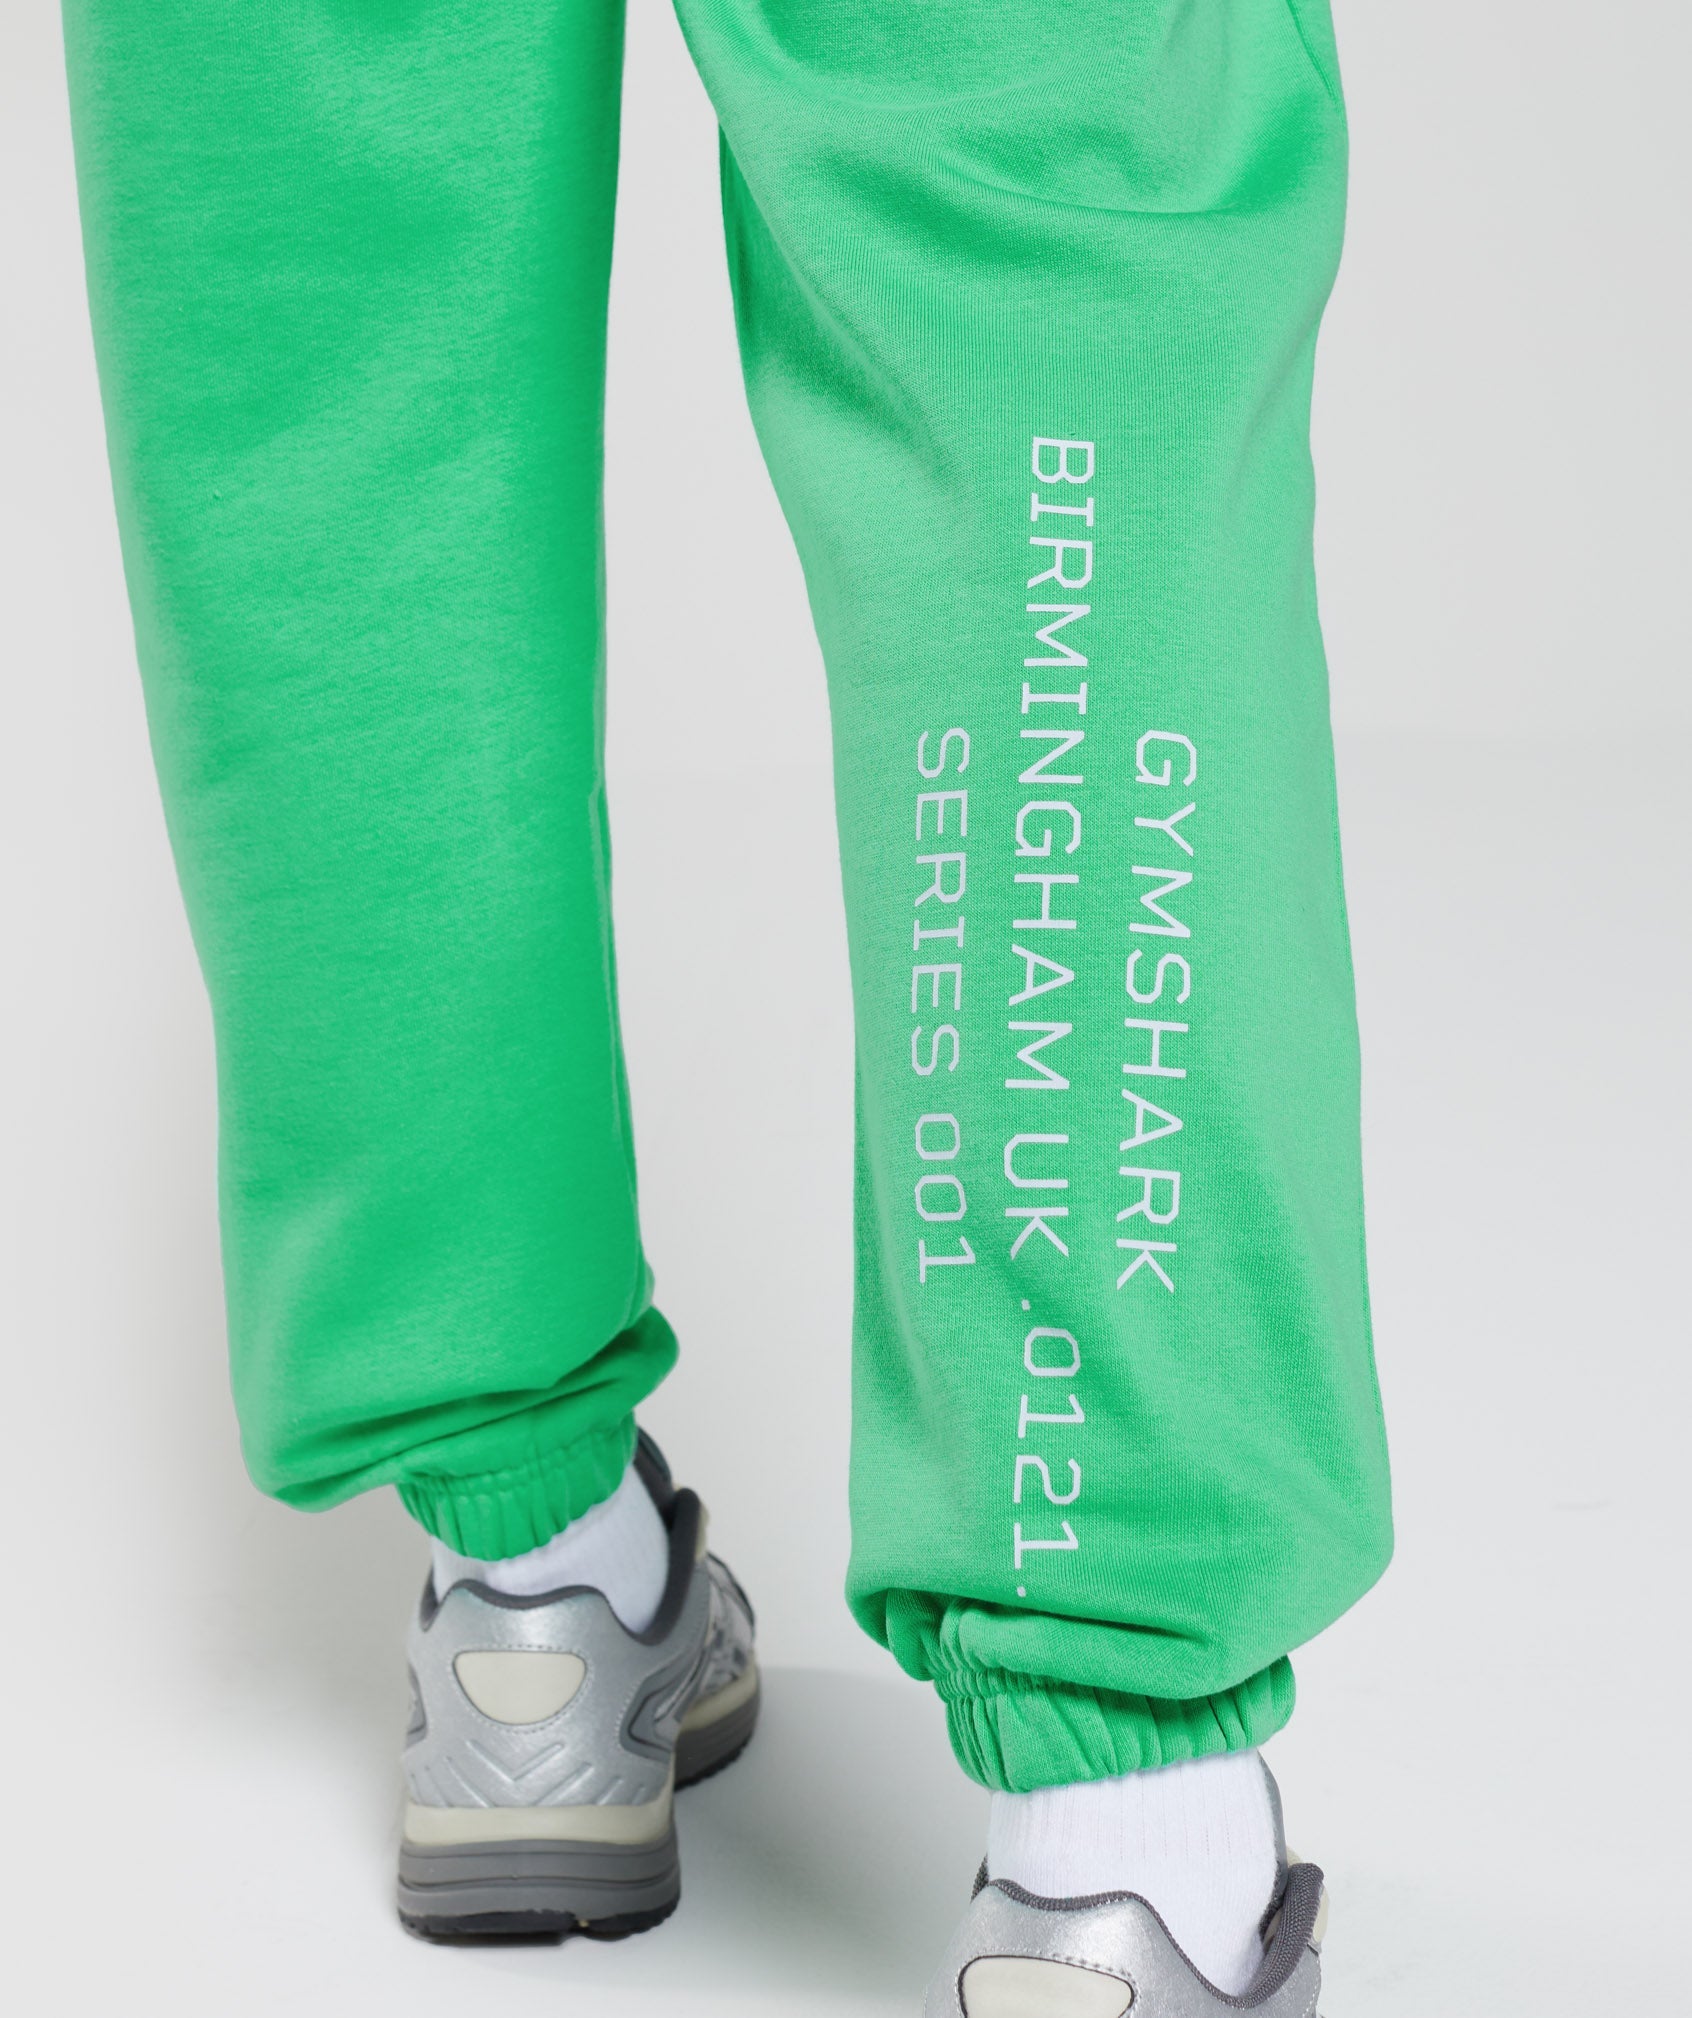 Activated Graphic Joggers in Tropic Green